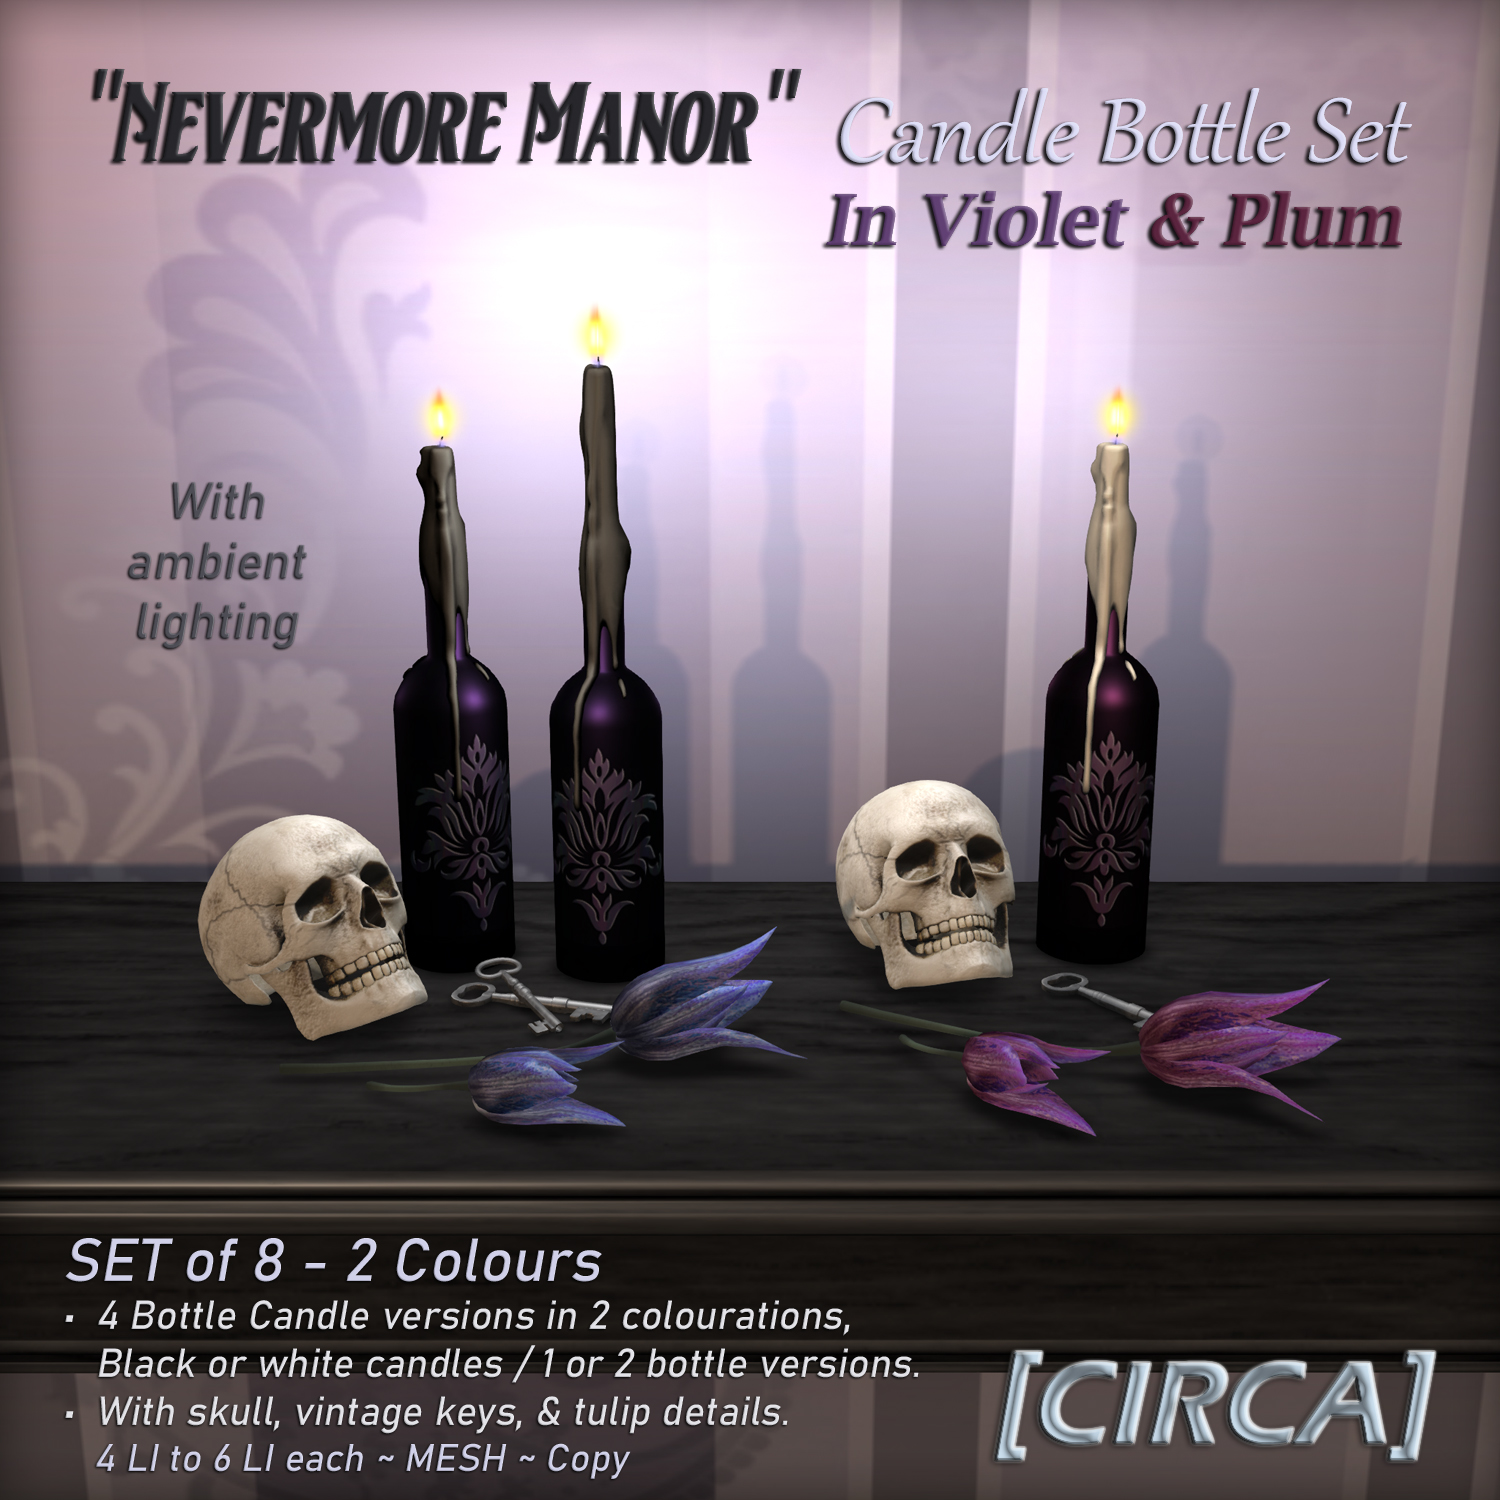 CIRCA – “Nevermore Manor” Candle Bottle Set